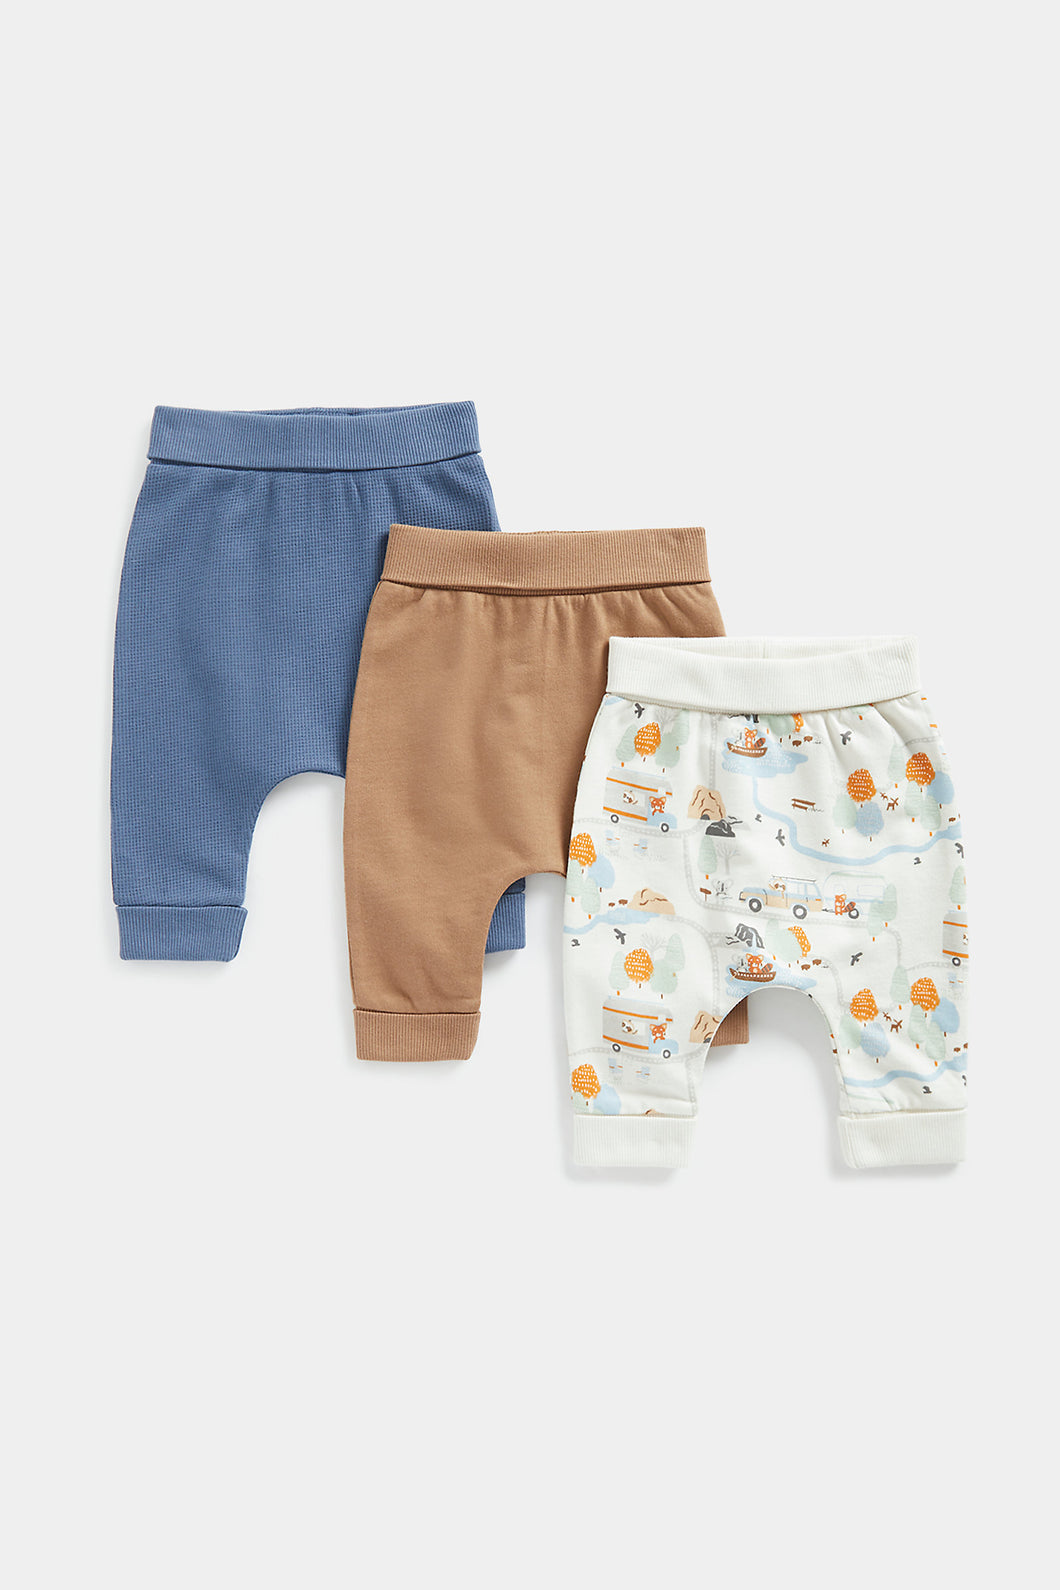 Mothercare Are We There Yet Joggers - 3 Pack